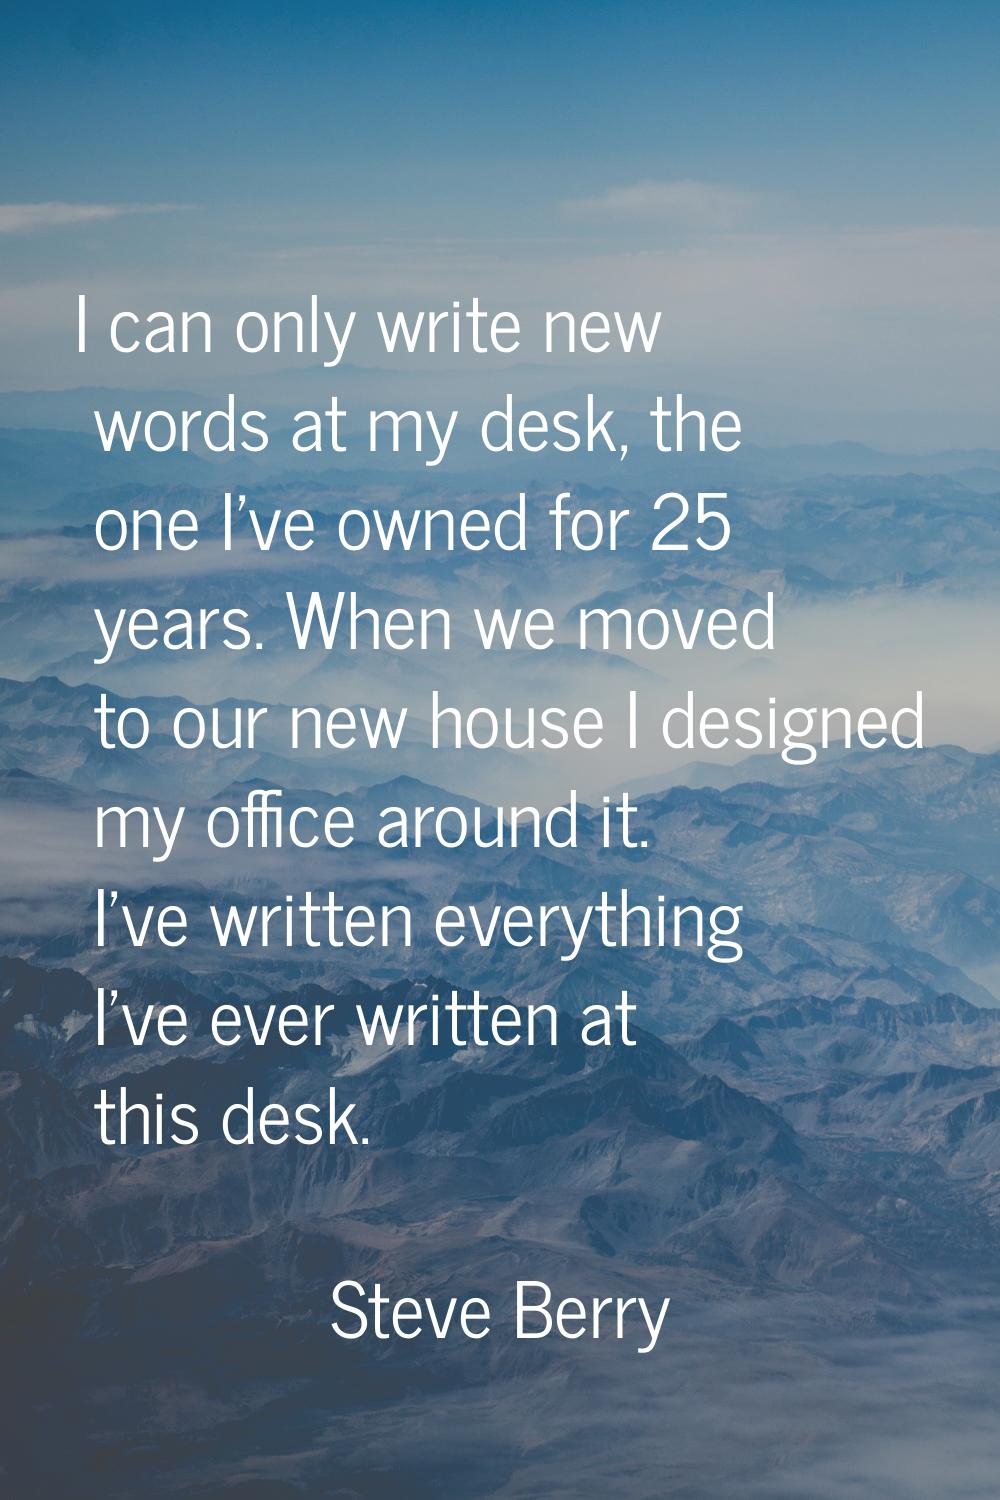 I can only write new words at my desk, the one I've owned for 25 years. When we moved to our new ho